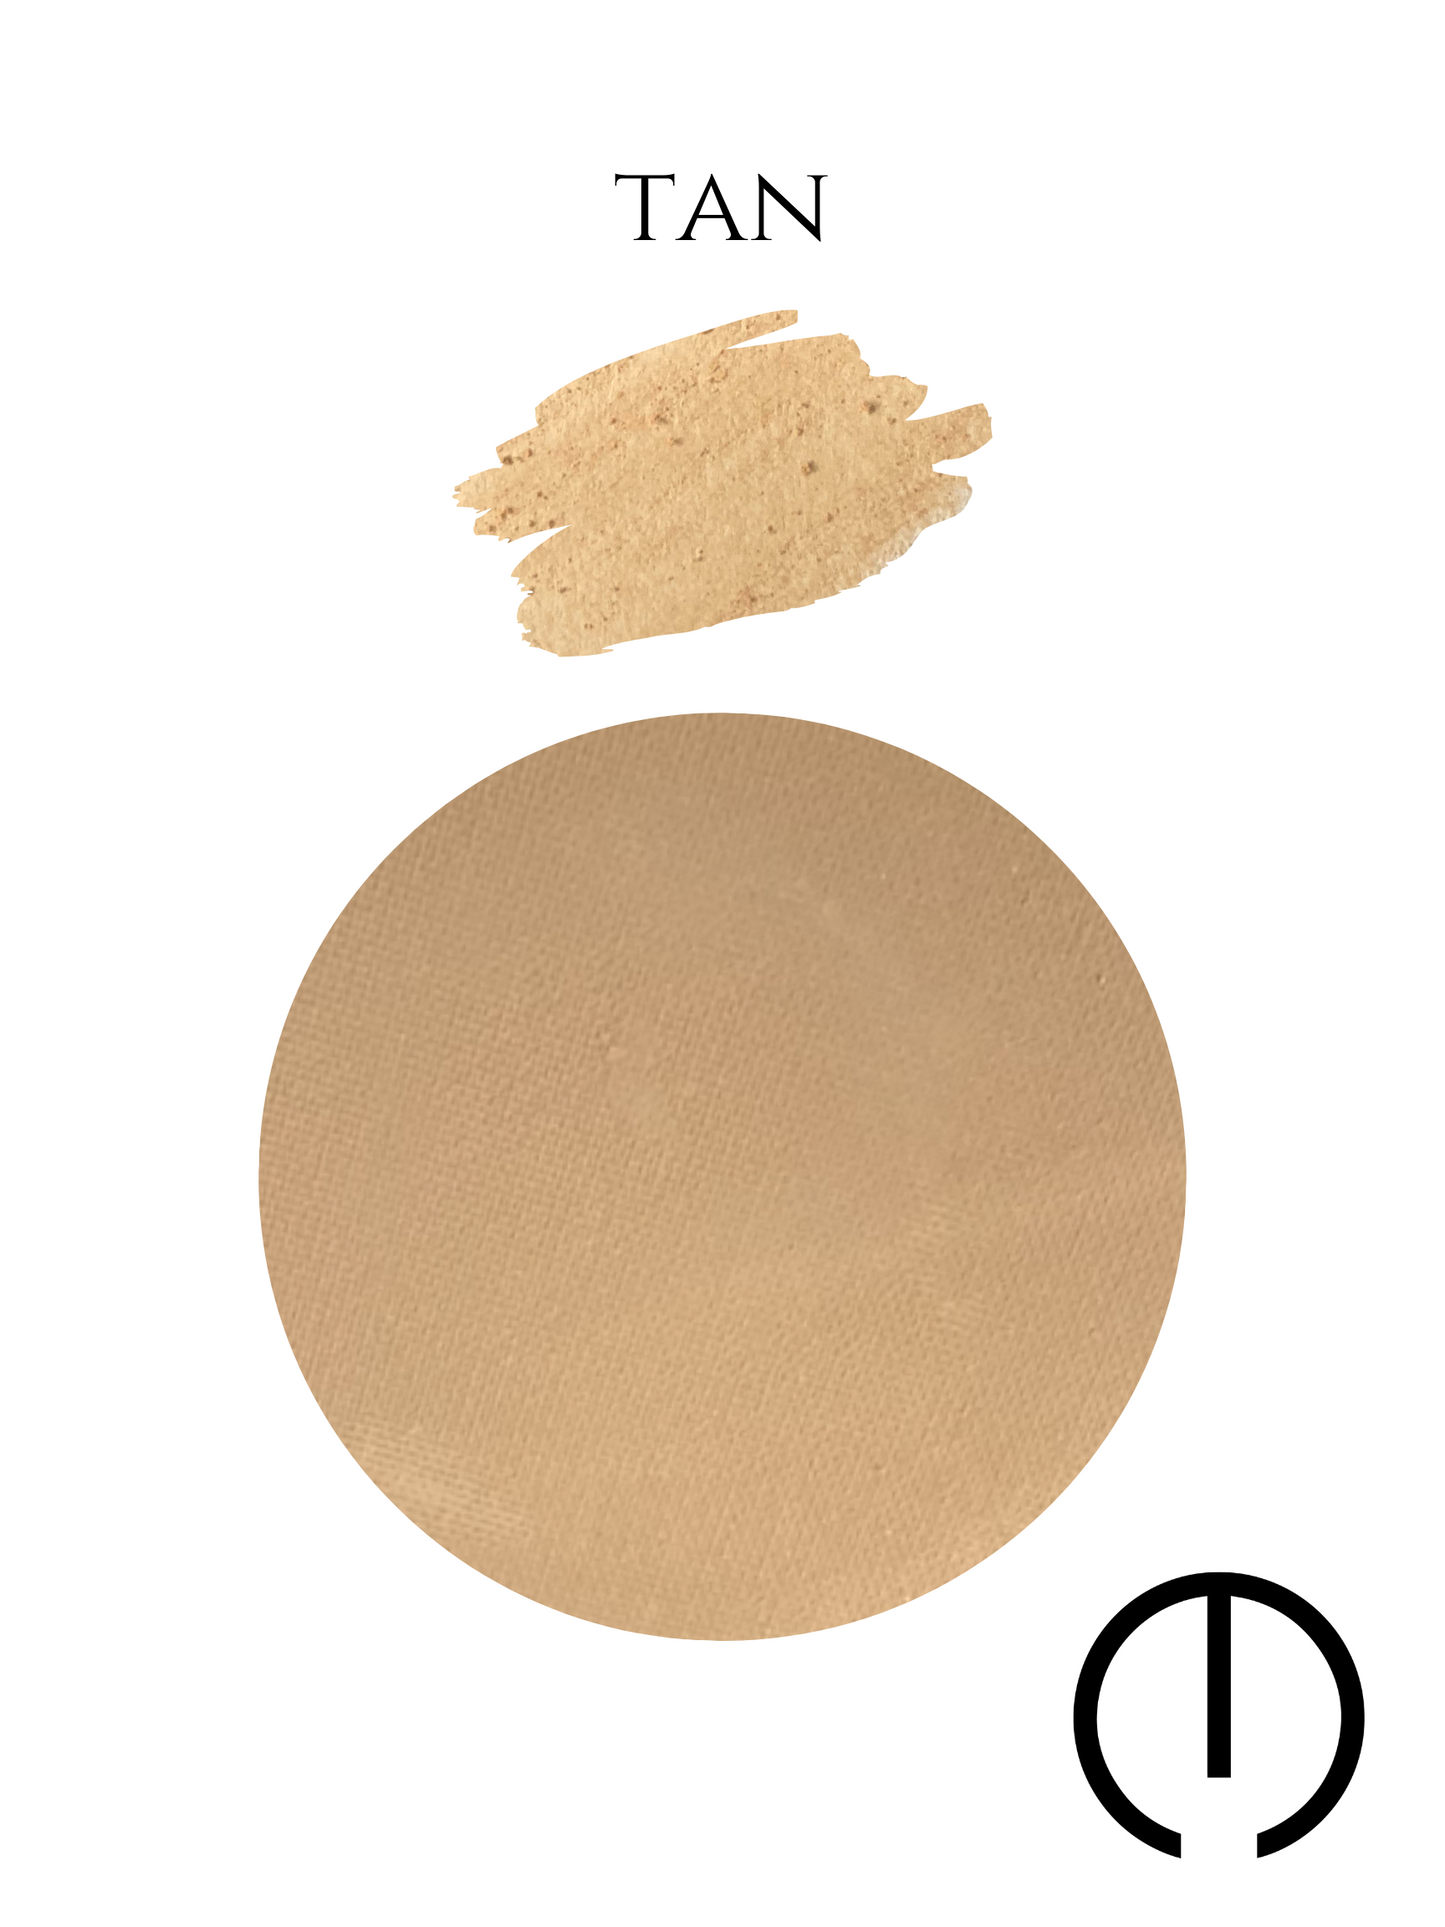 Powder Foundation - Multiple Colors Available - Makeupology Store